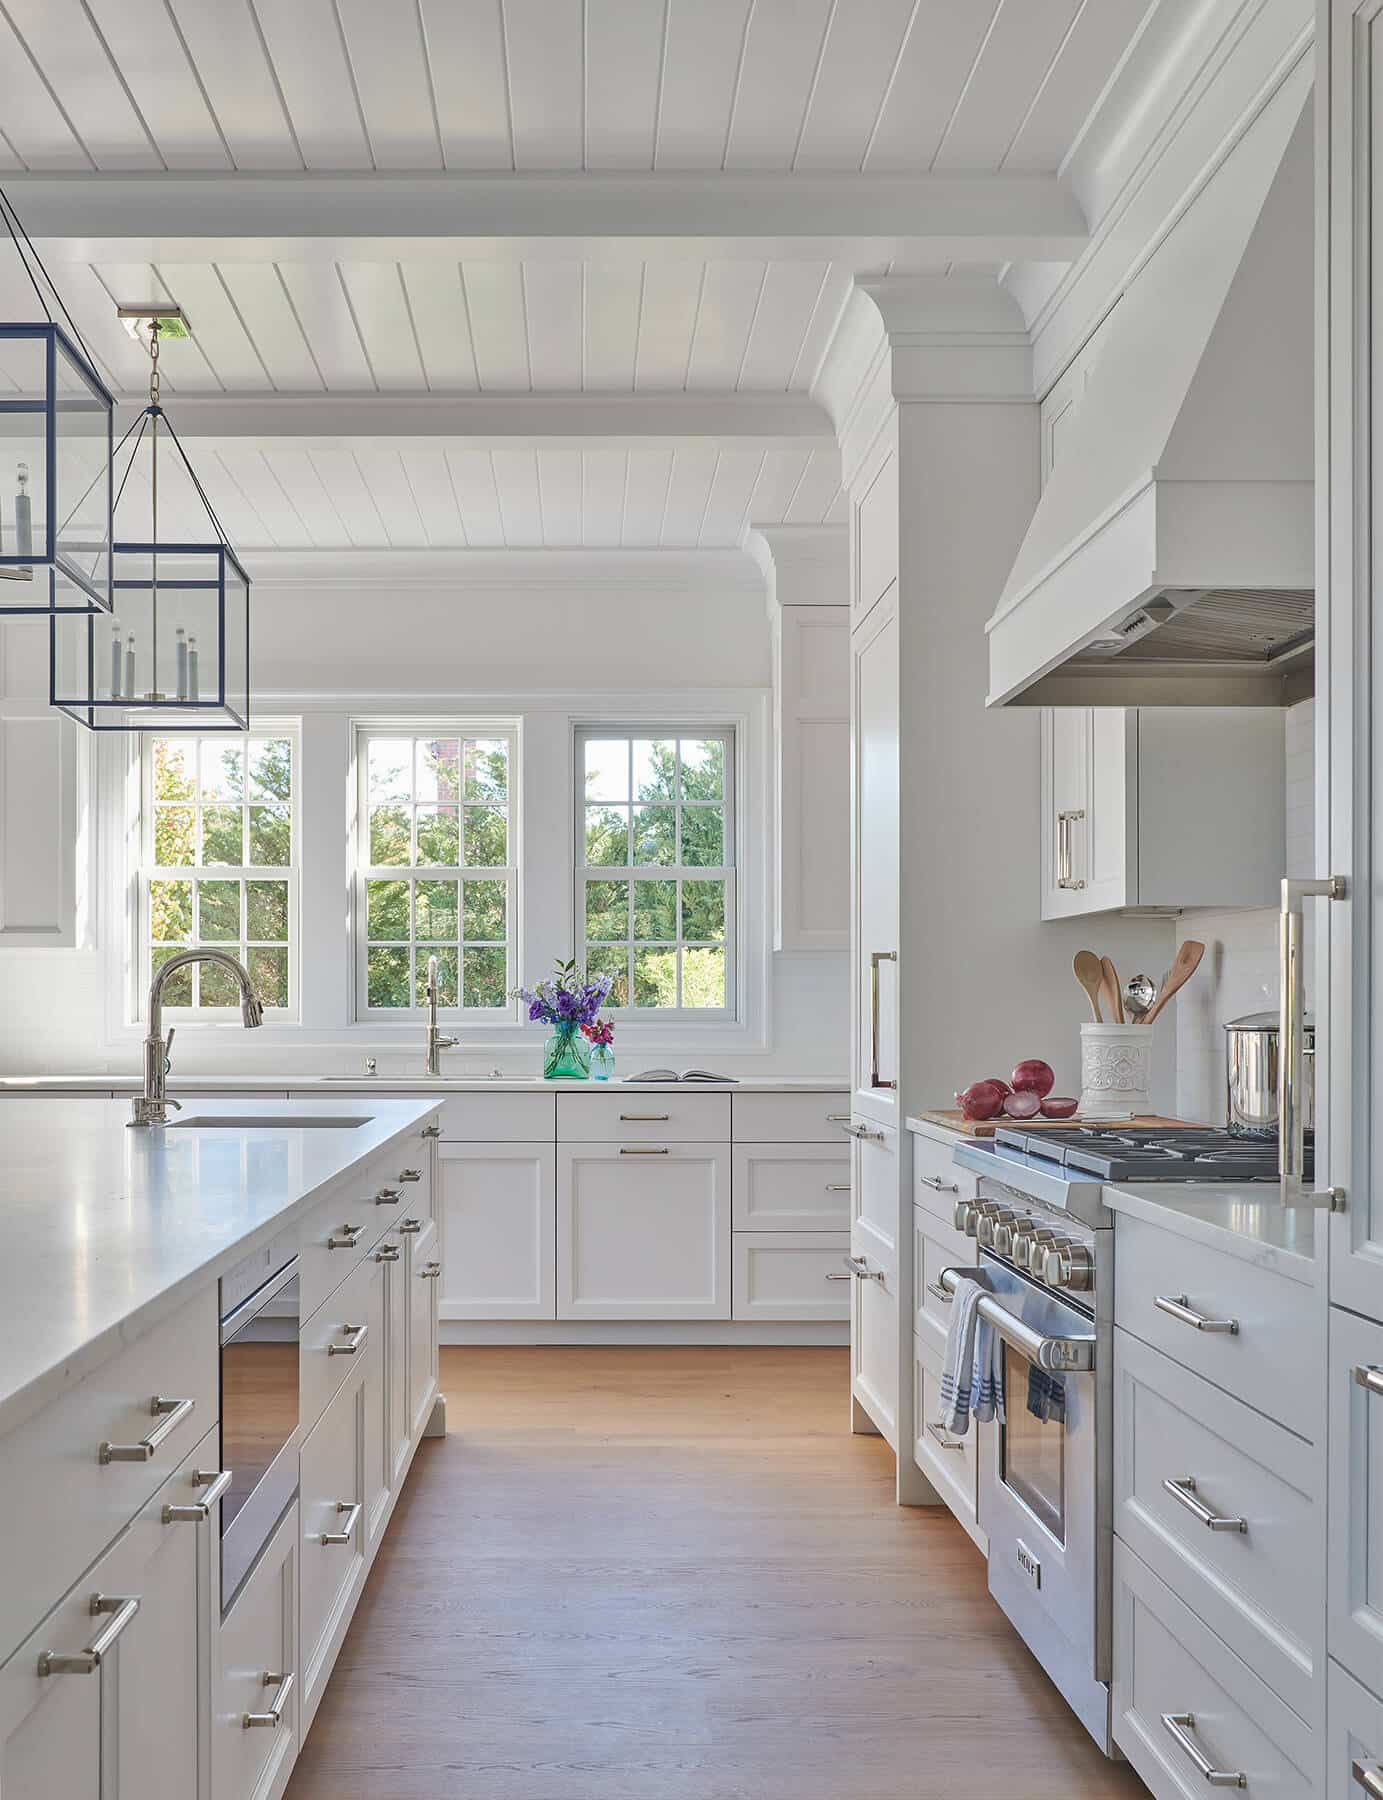 Nantucket, kitchen island and stove with window view